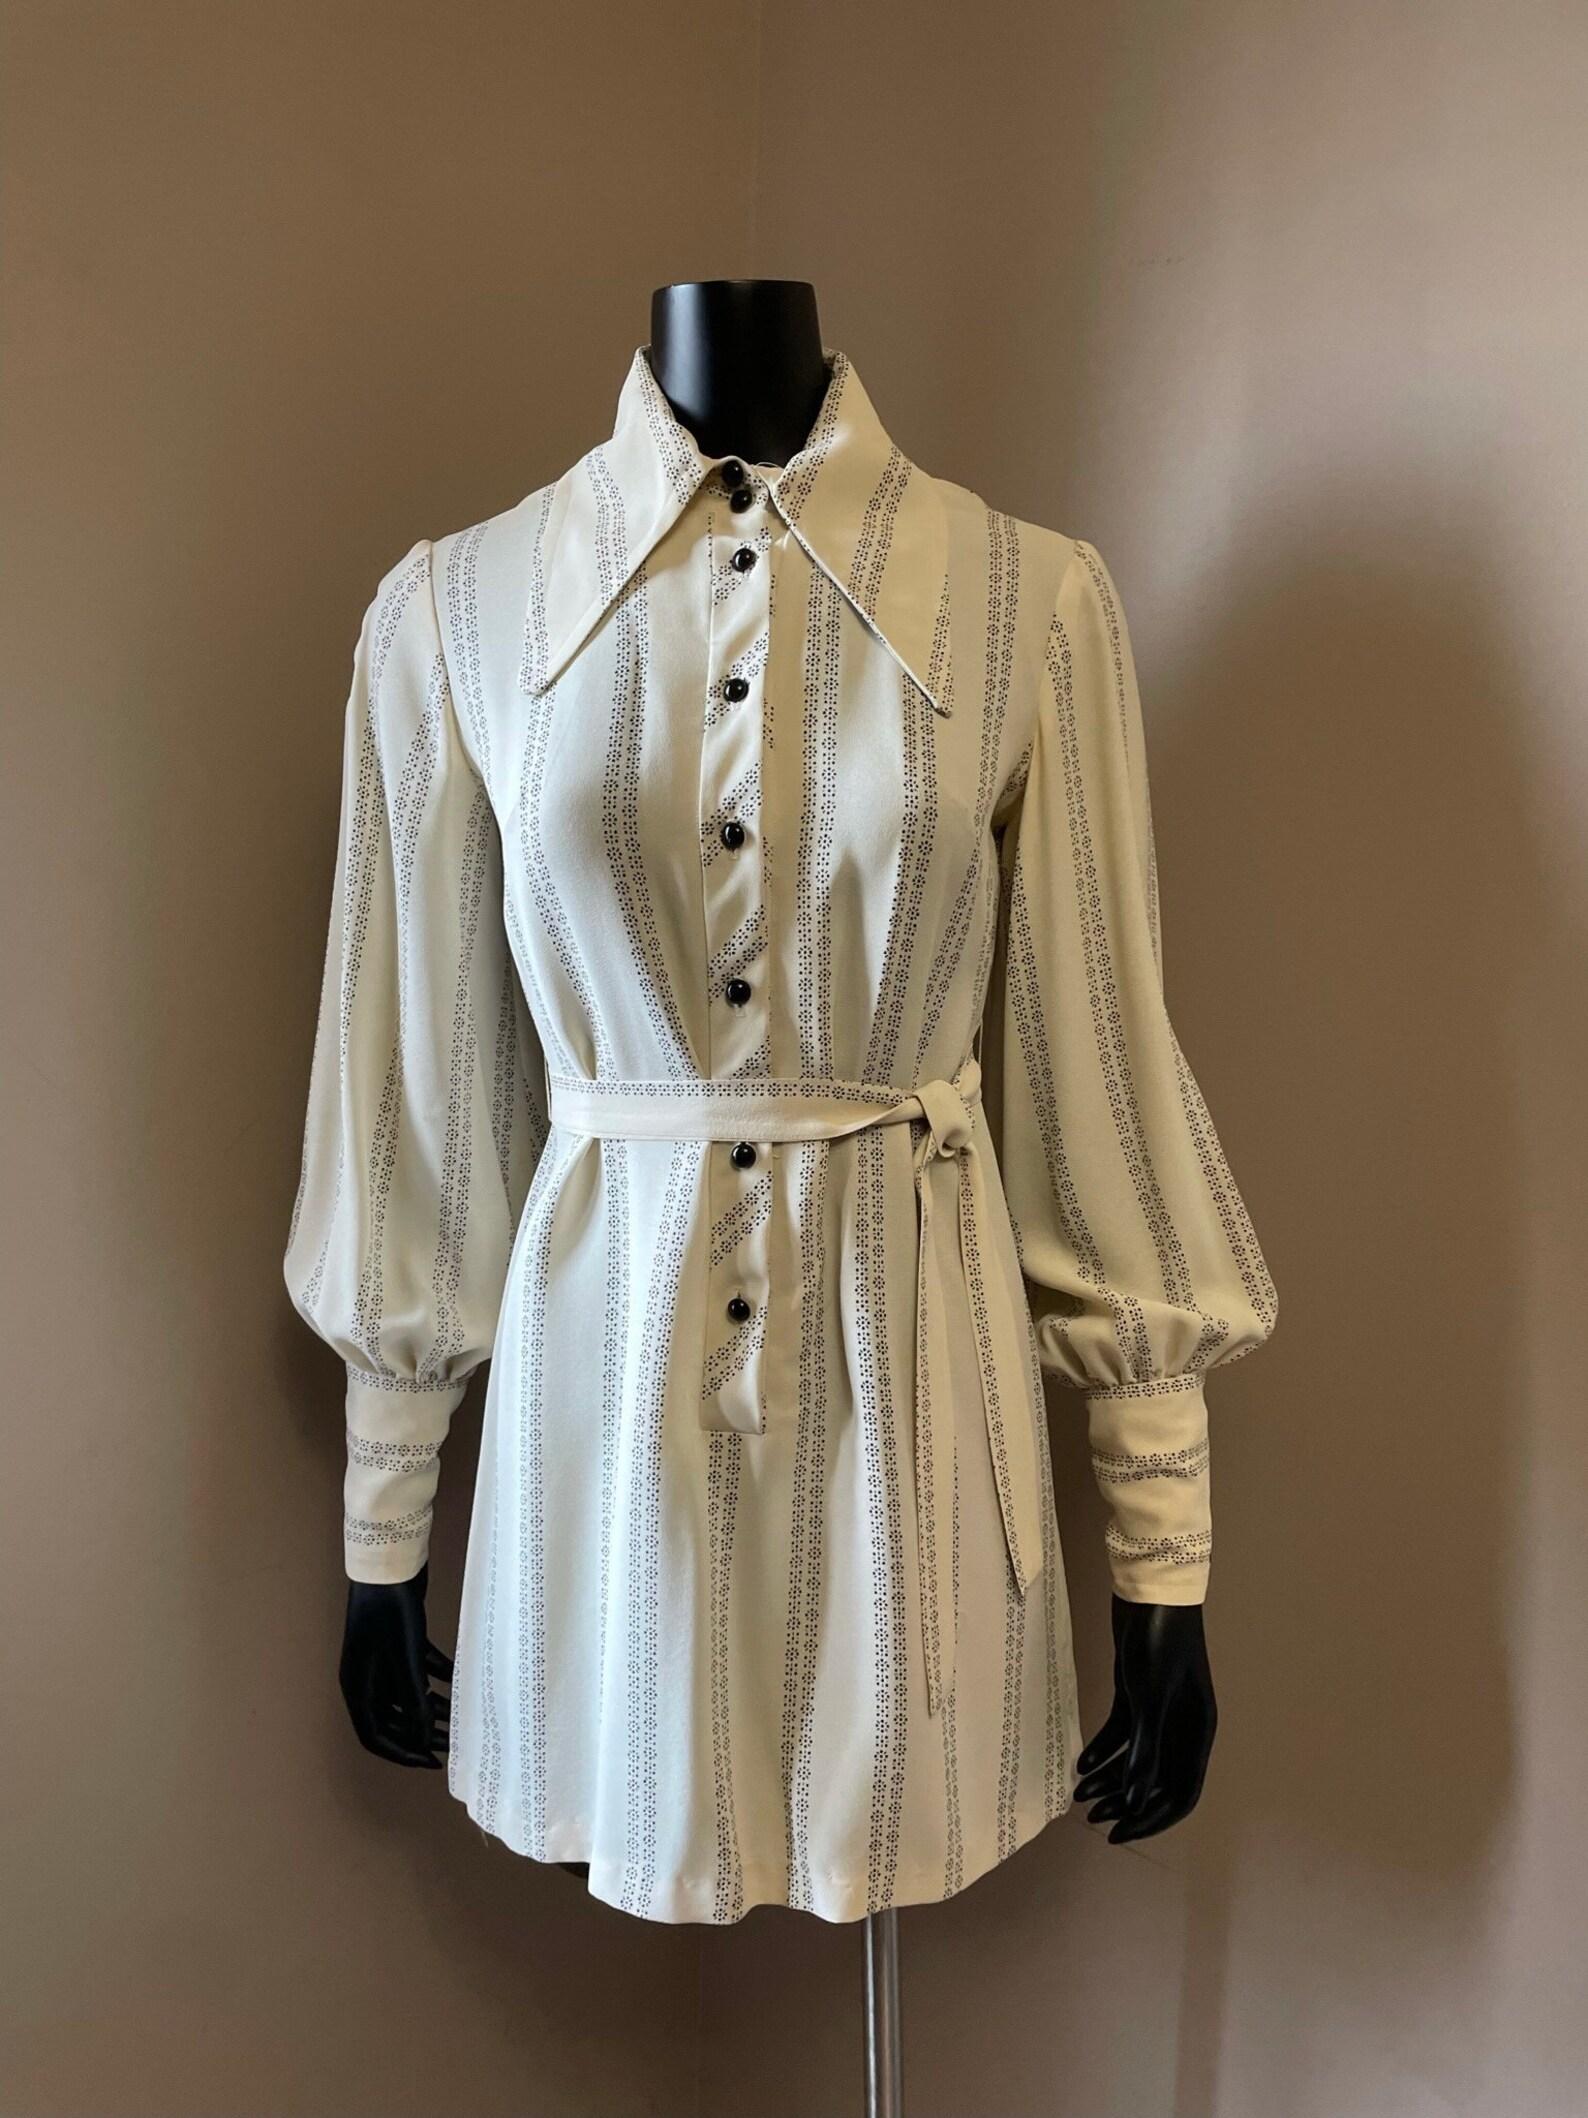 Vintage cream beige and black mini dress
shirt dress styling
exaggerated dagger collar
bishop sleeves
black button front placket & collar
matching sash belt

Circa 1970s
Union Label & Size Label Only
Cream/Black
Cold Rayon
Tagged Size 9
Made in